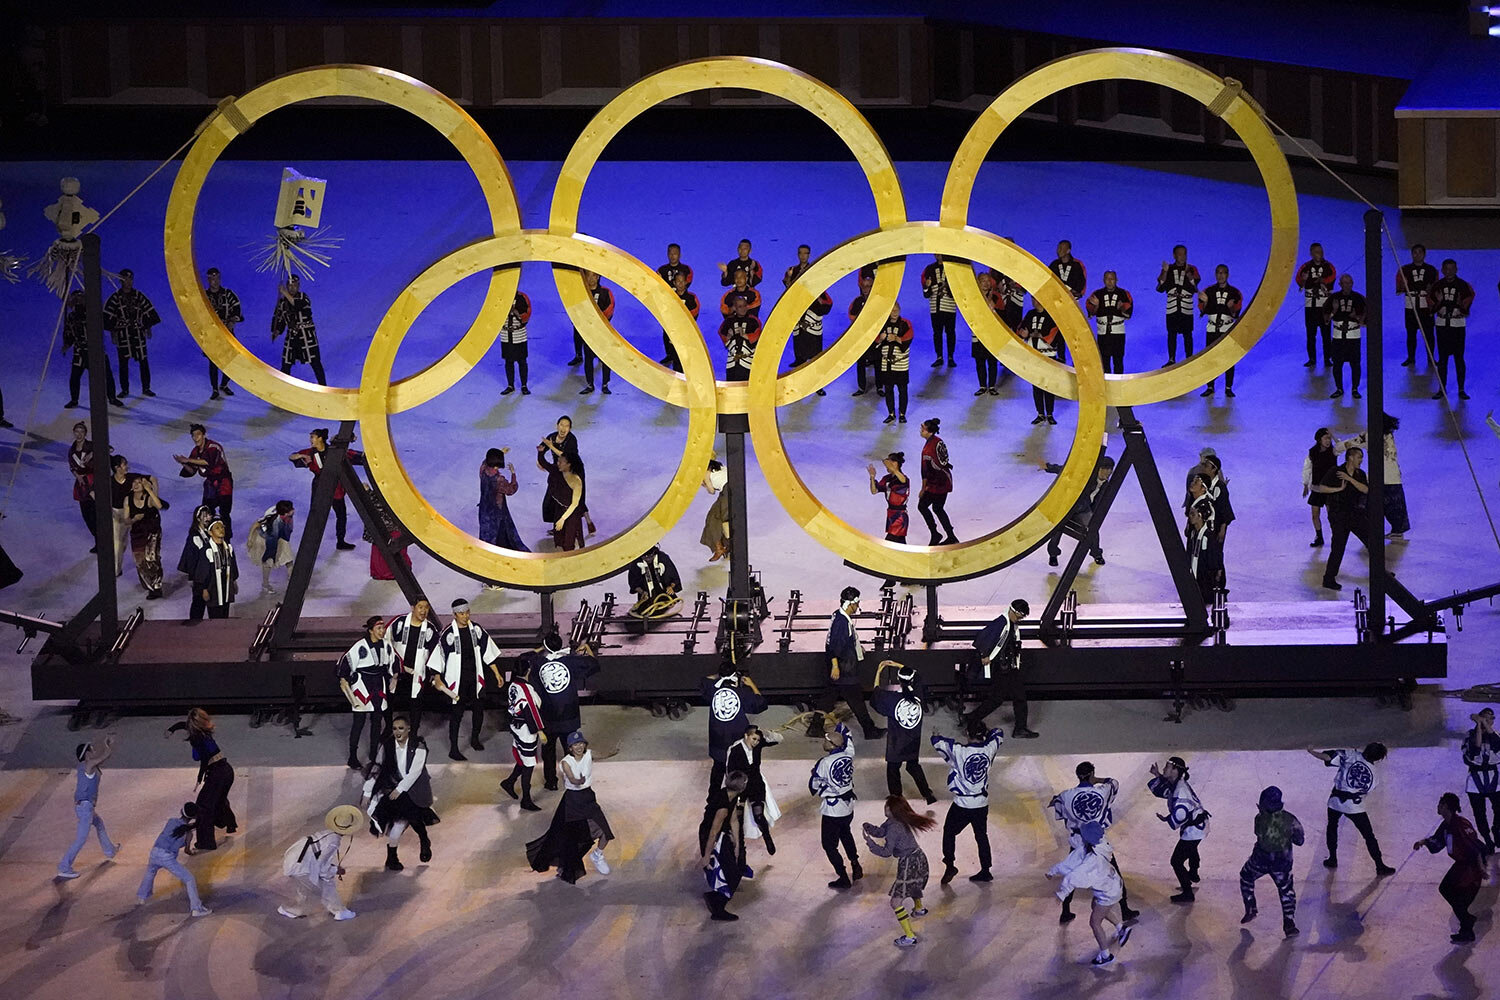  Dancers perform during the opening ceremony in the Olympic Stadium at the 2020 Summer Olympics, Friday, July 23, 2021, in Tokyo, Japan. (AP Photo/Charlie Riedel) 